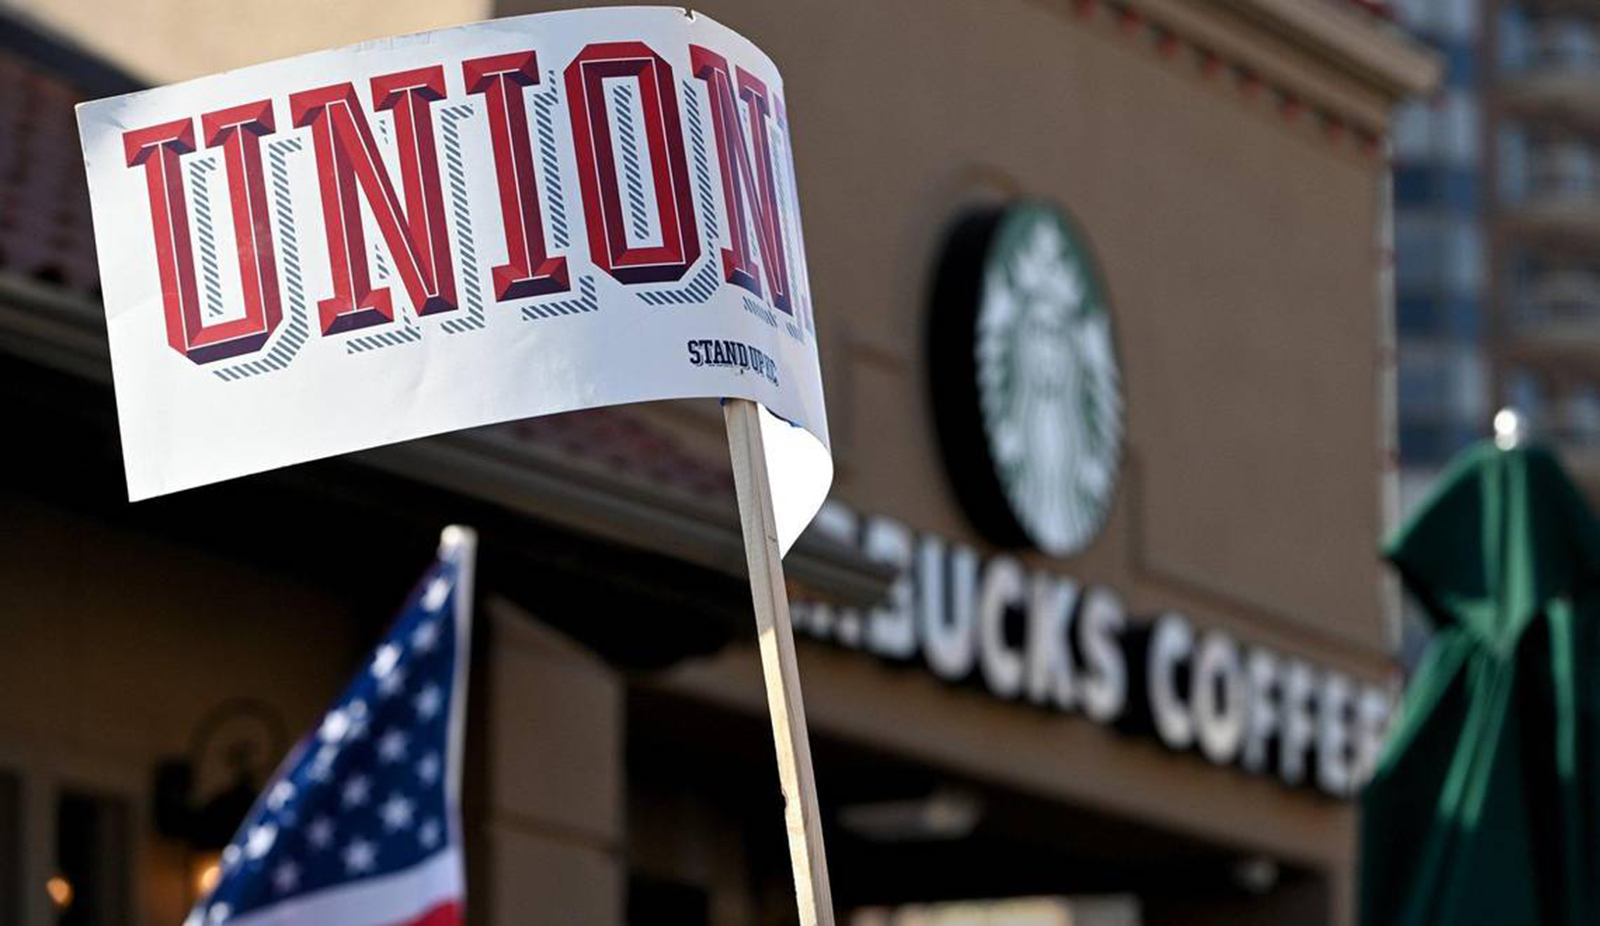 A sign reading “Union” waves outside a Starbucks store.